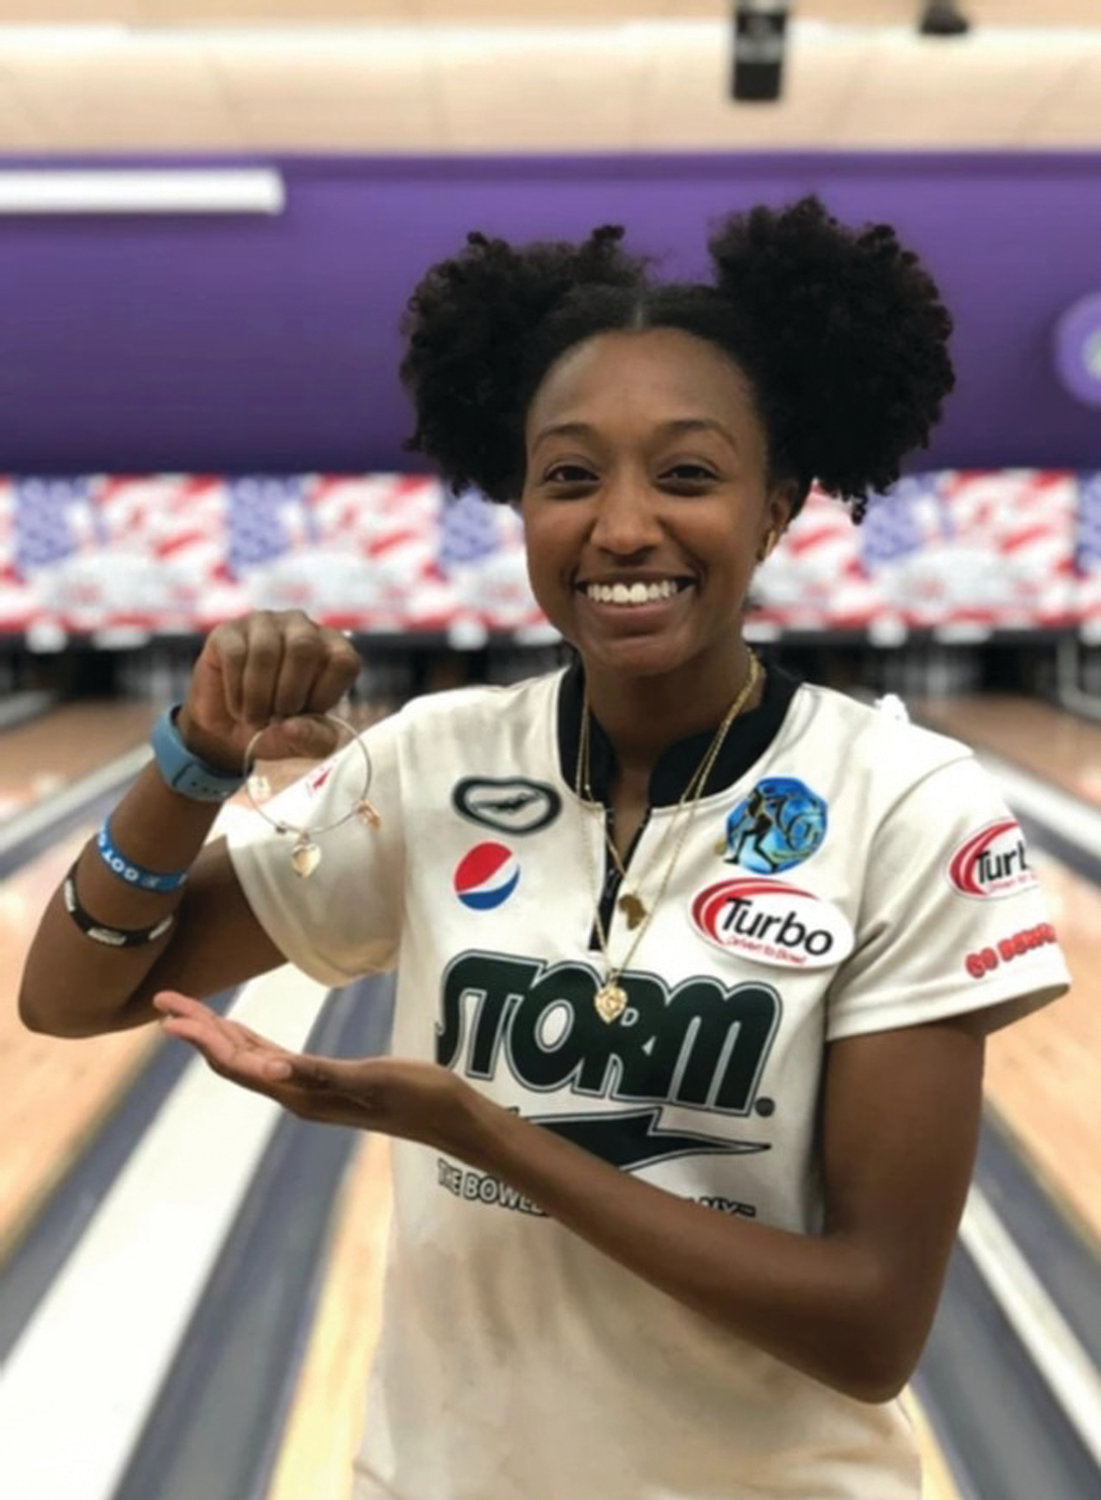 ‘SHARE MY STORY’: In the wake of her bowling success, Gazmine Mason and her family have started a company called Got Game. “I am continuing to share my story with people … I can have an impact, and I want to help,” she said.